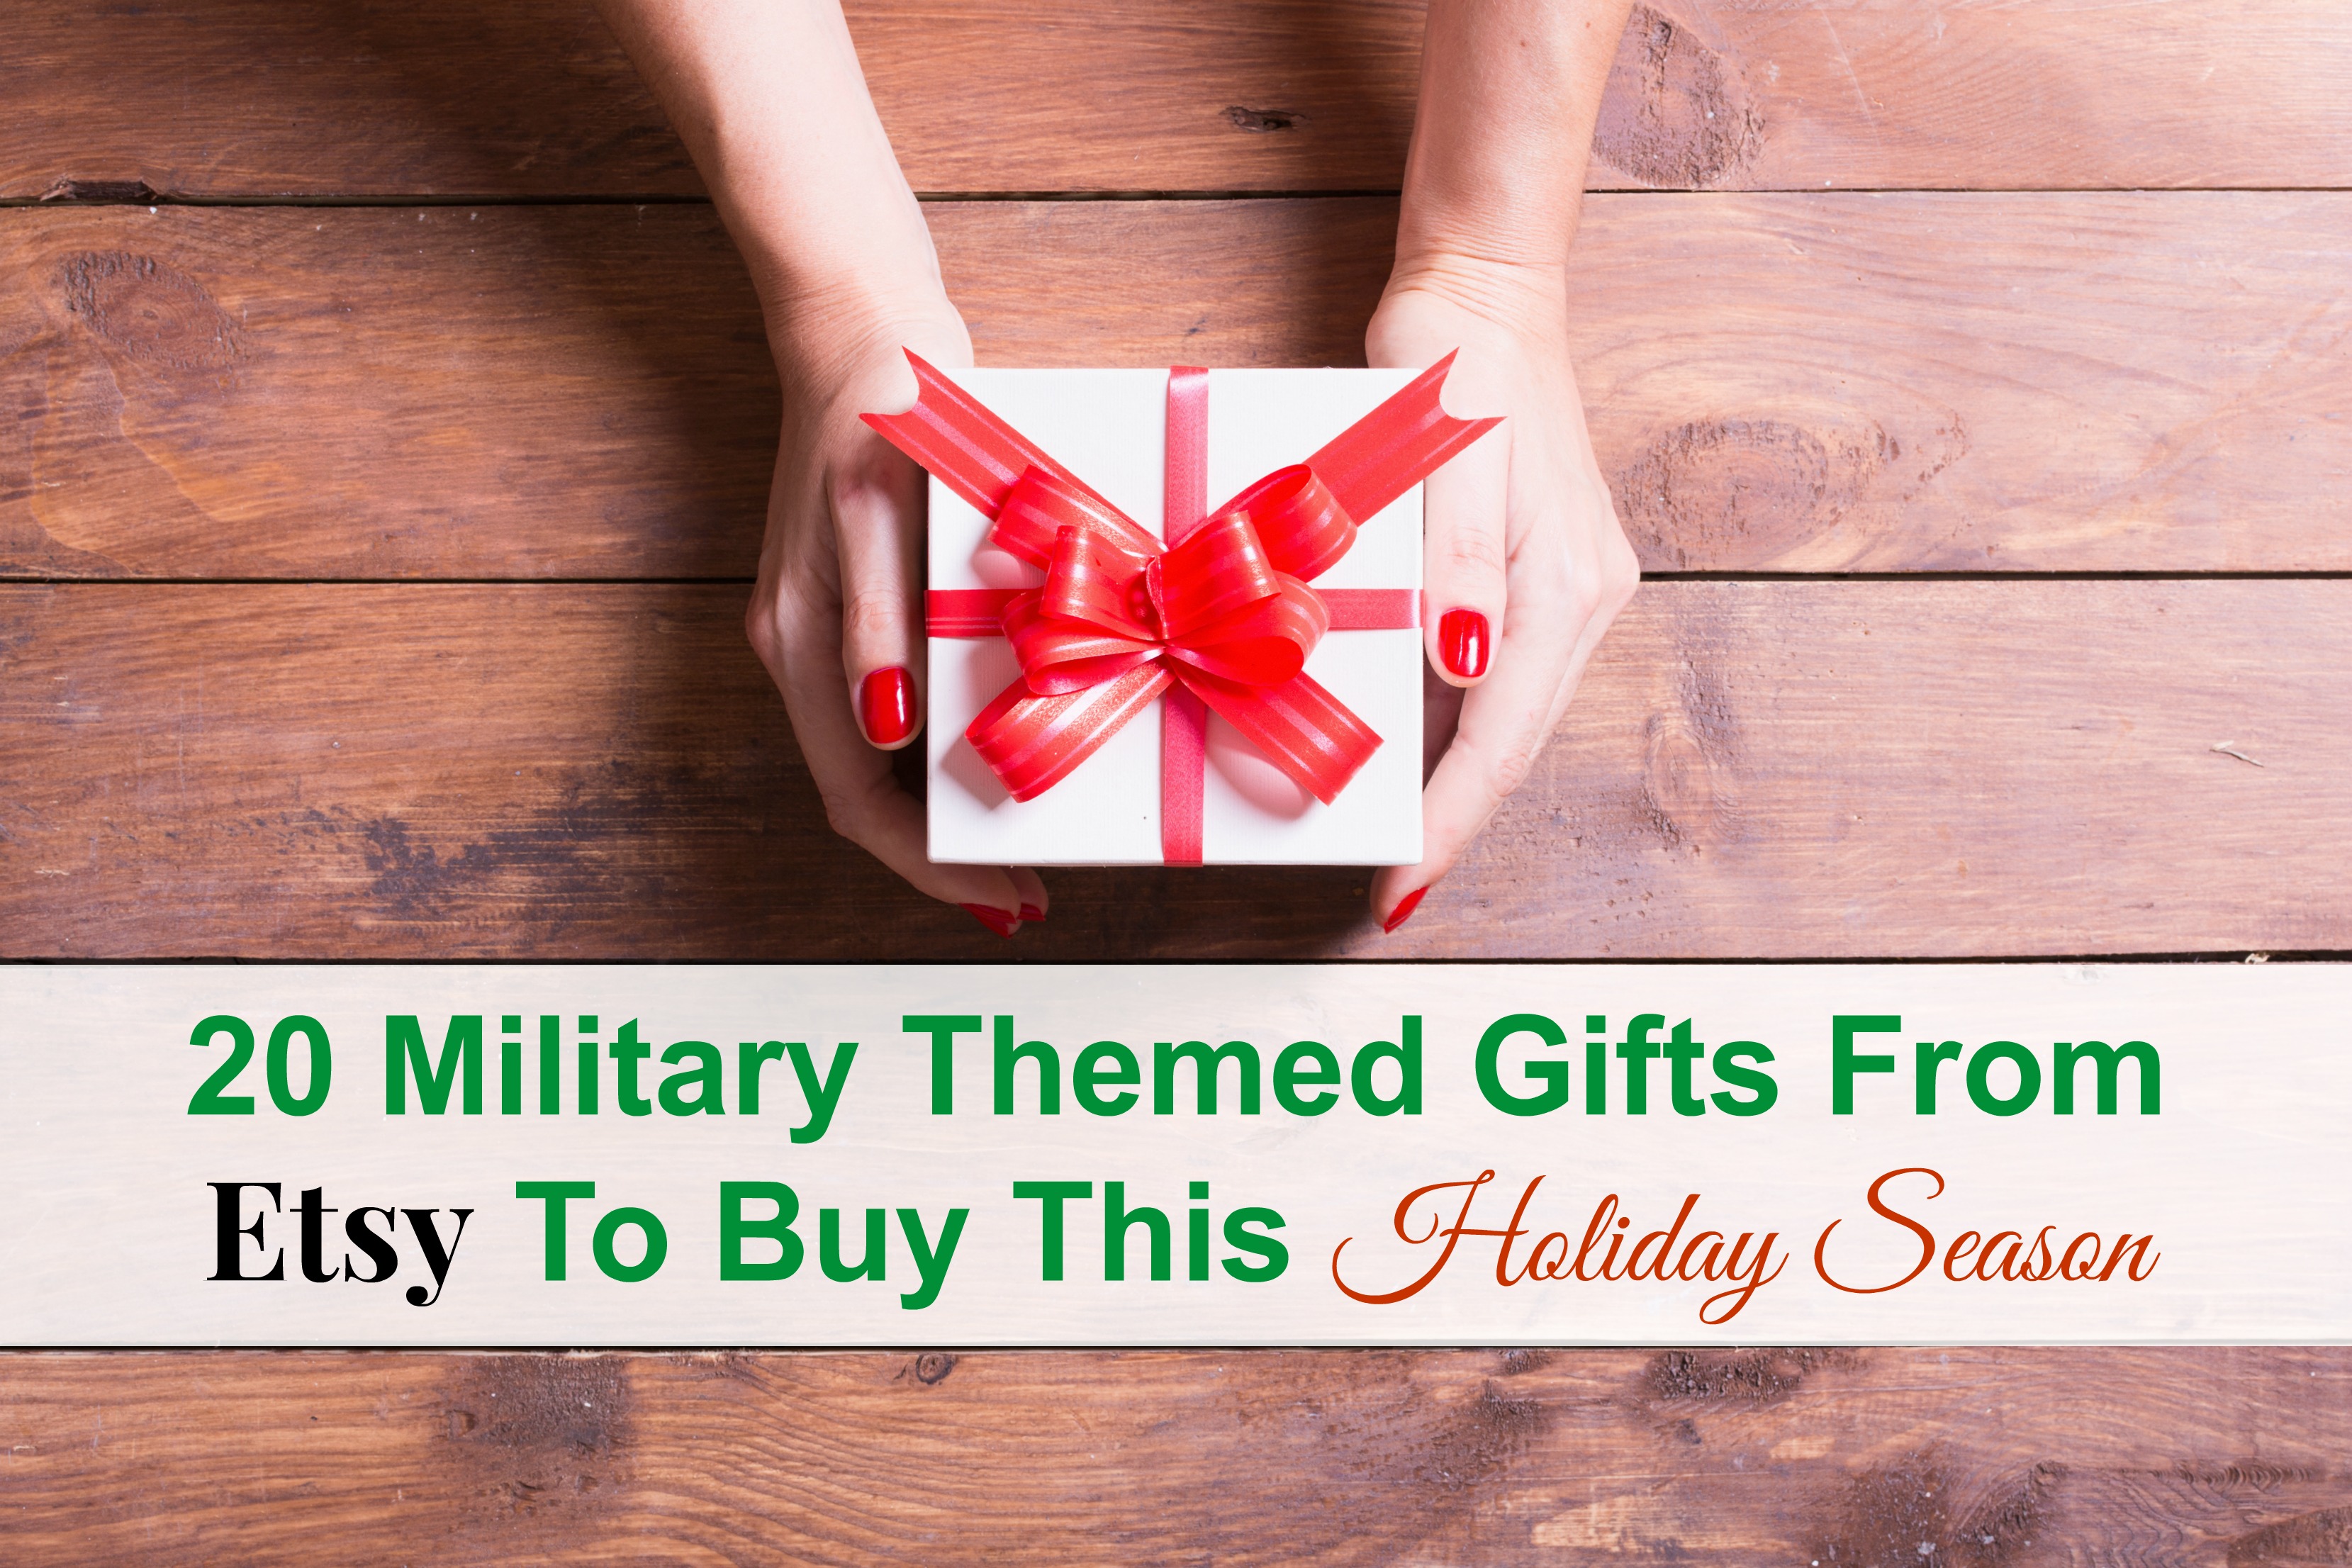 20 Military Themed Gifts From Etsy To Buy This Holiday ...